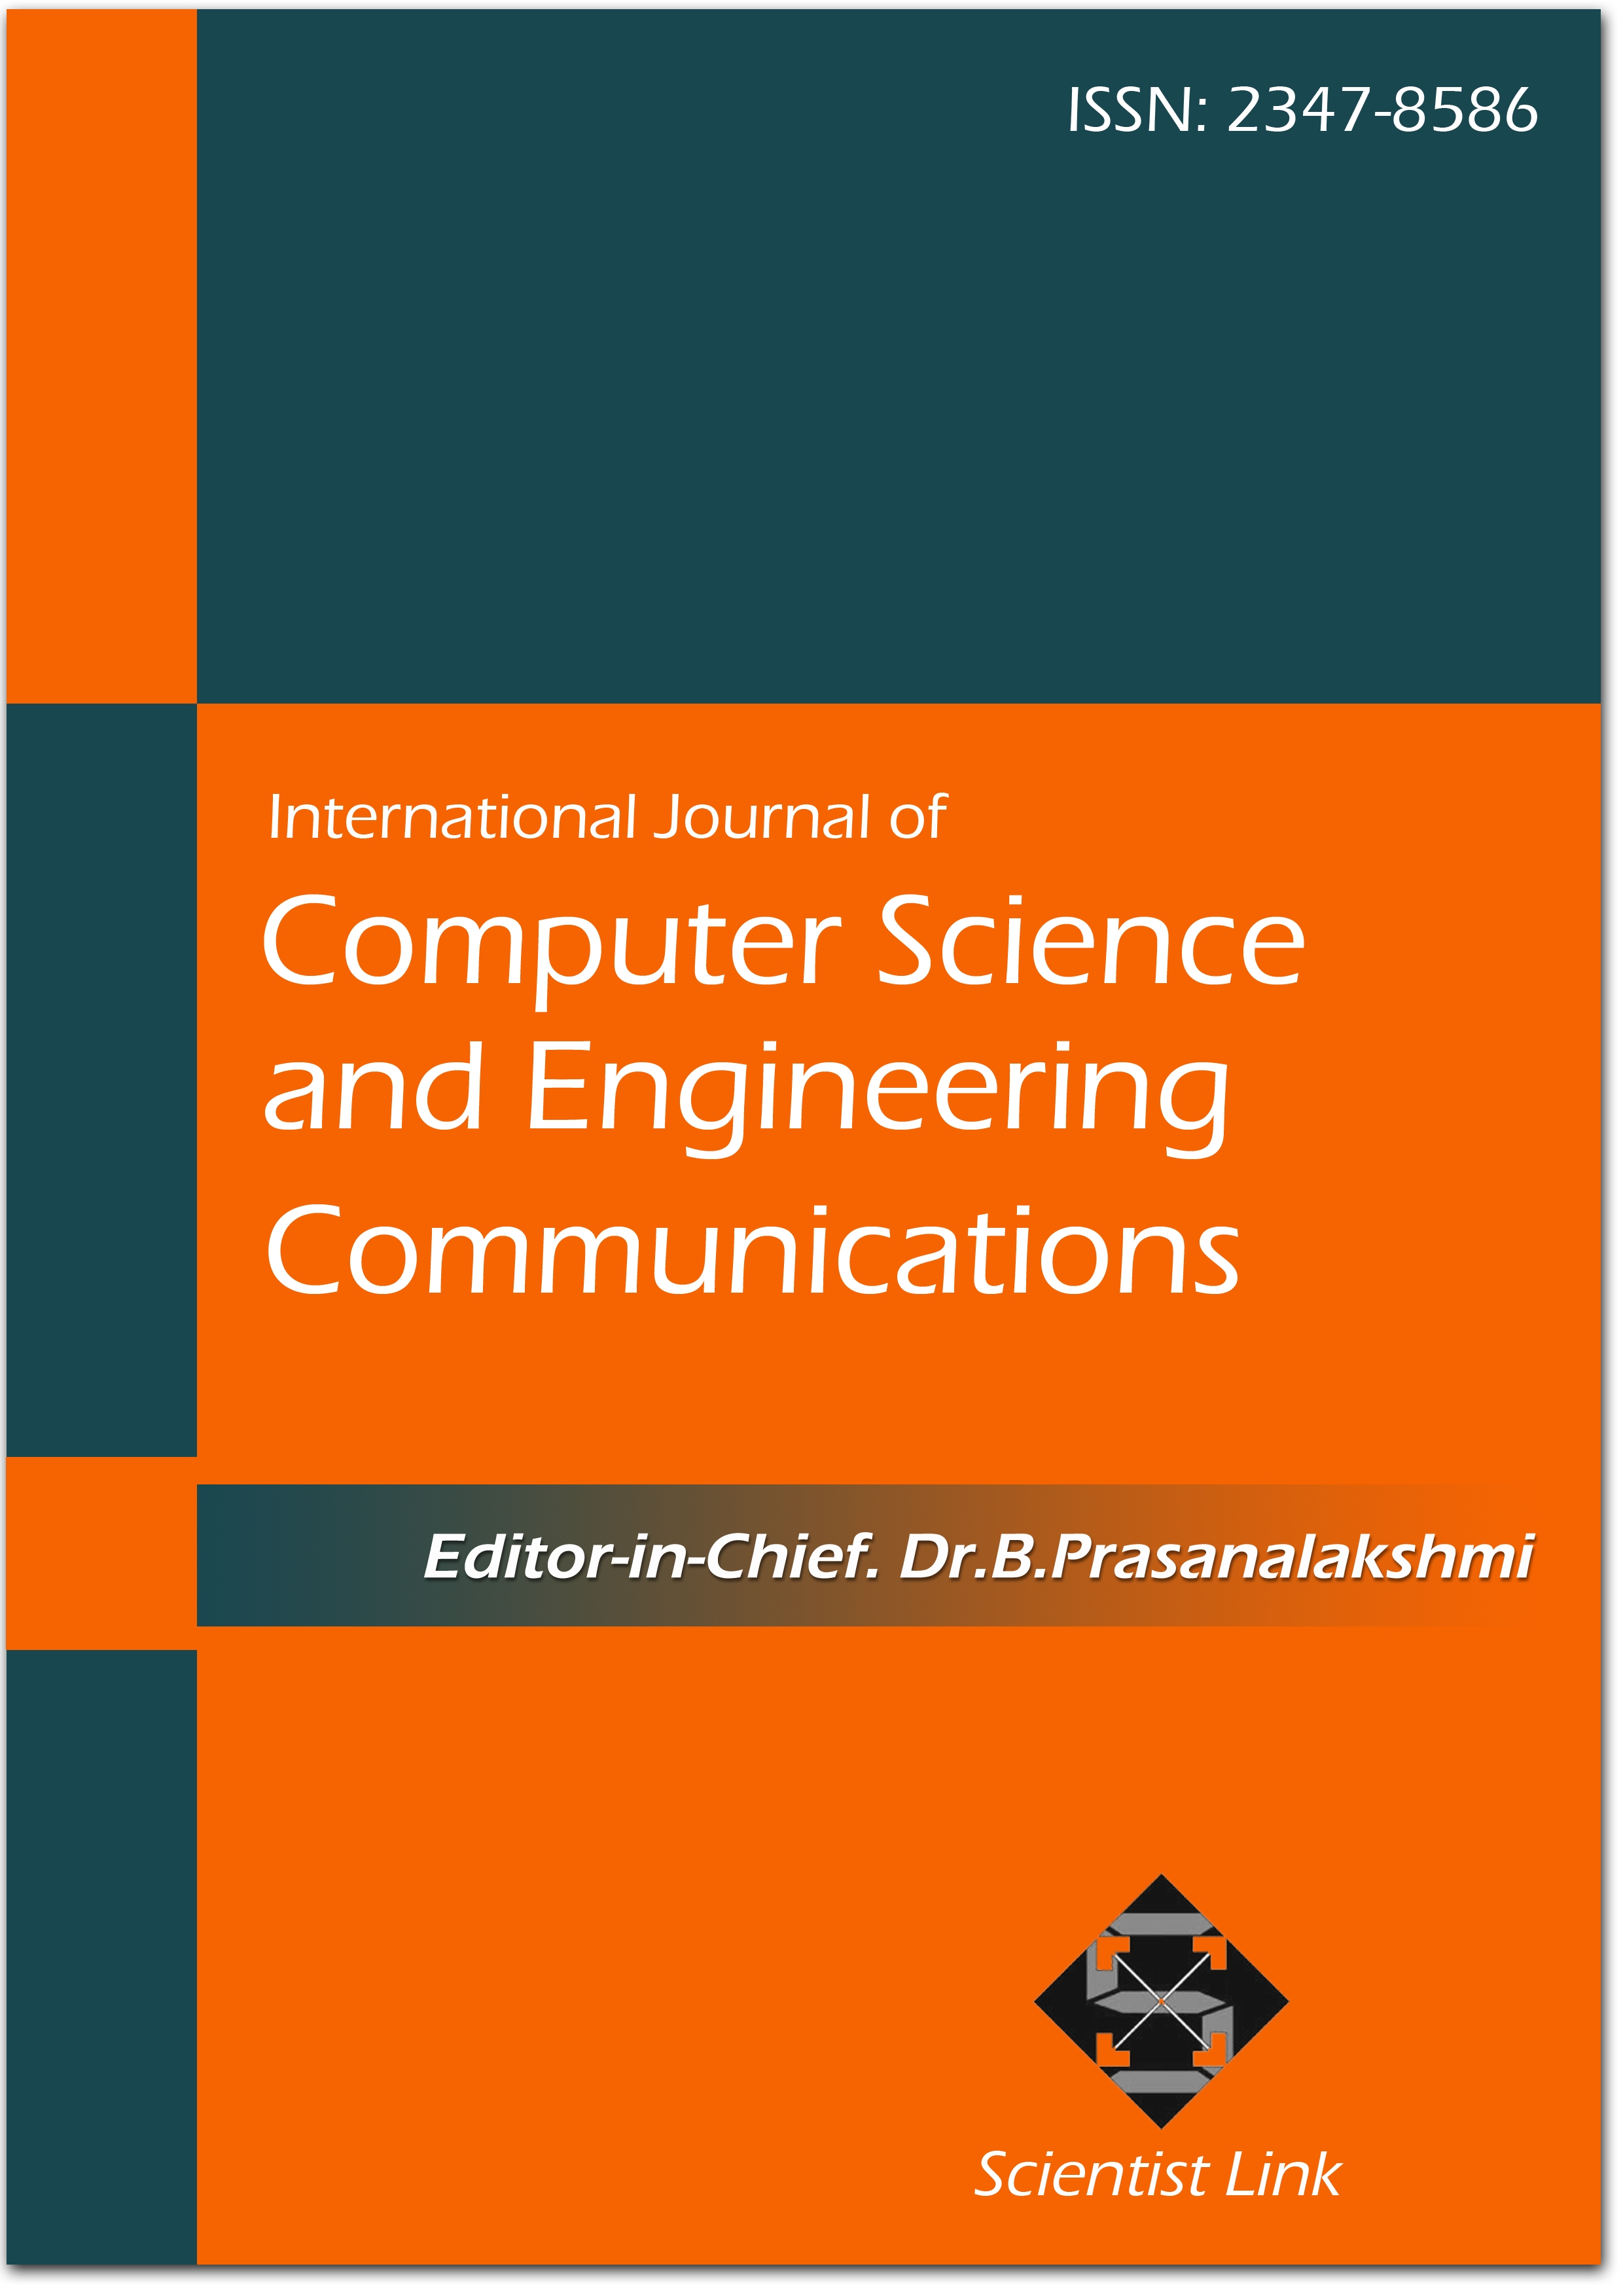 Journal: International Journal of Computer Science and Engineering